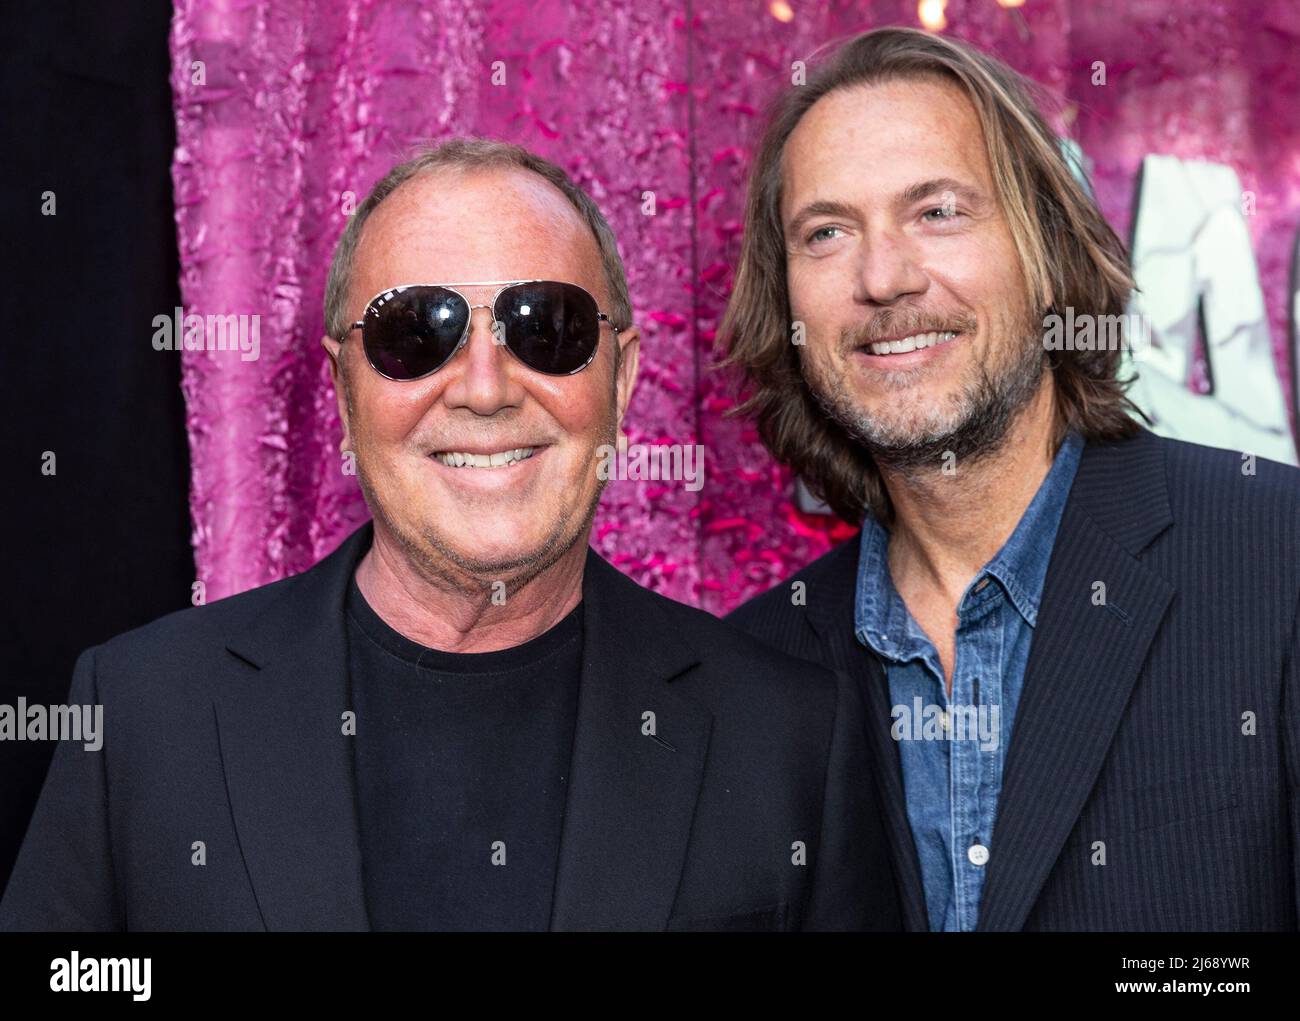 Michael Kors & Husband Lance LePere Step Out for Lunch in Rare Outing:  Photo 4928872, Lance LePere, Michael Kors Photos